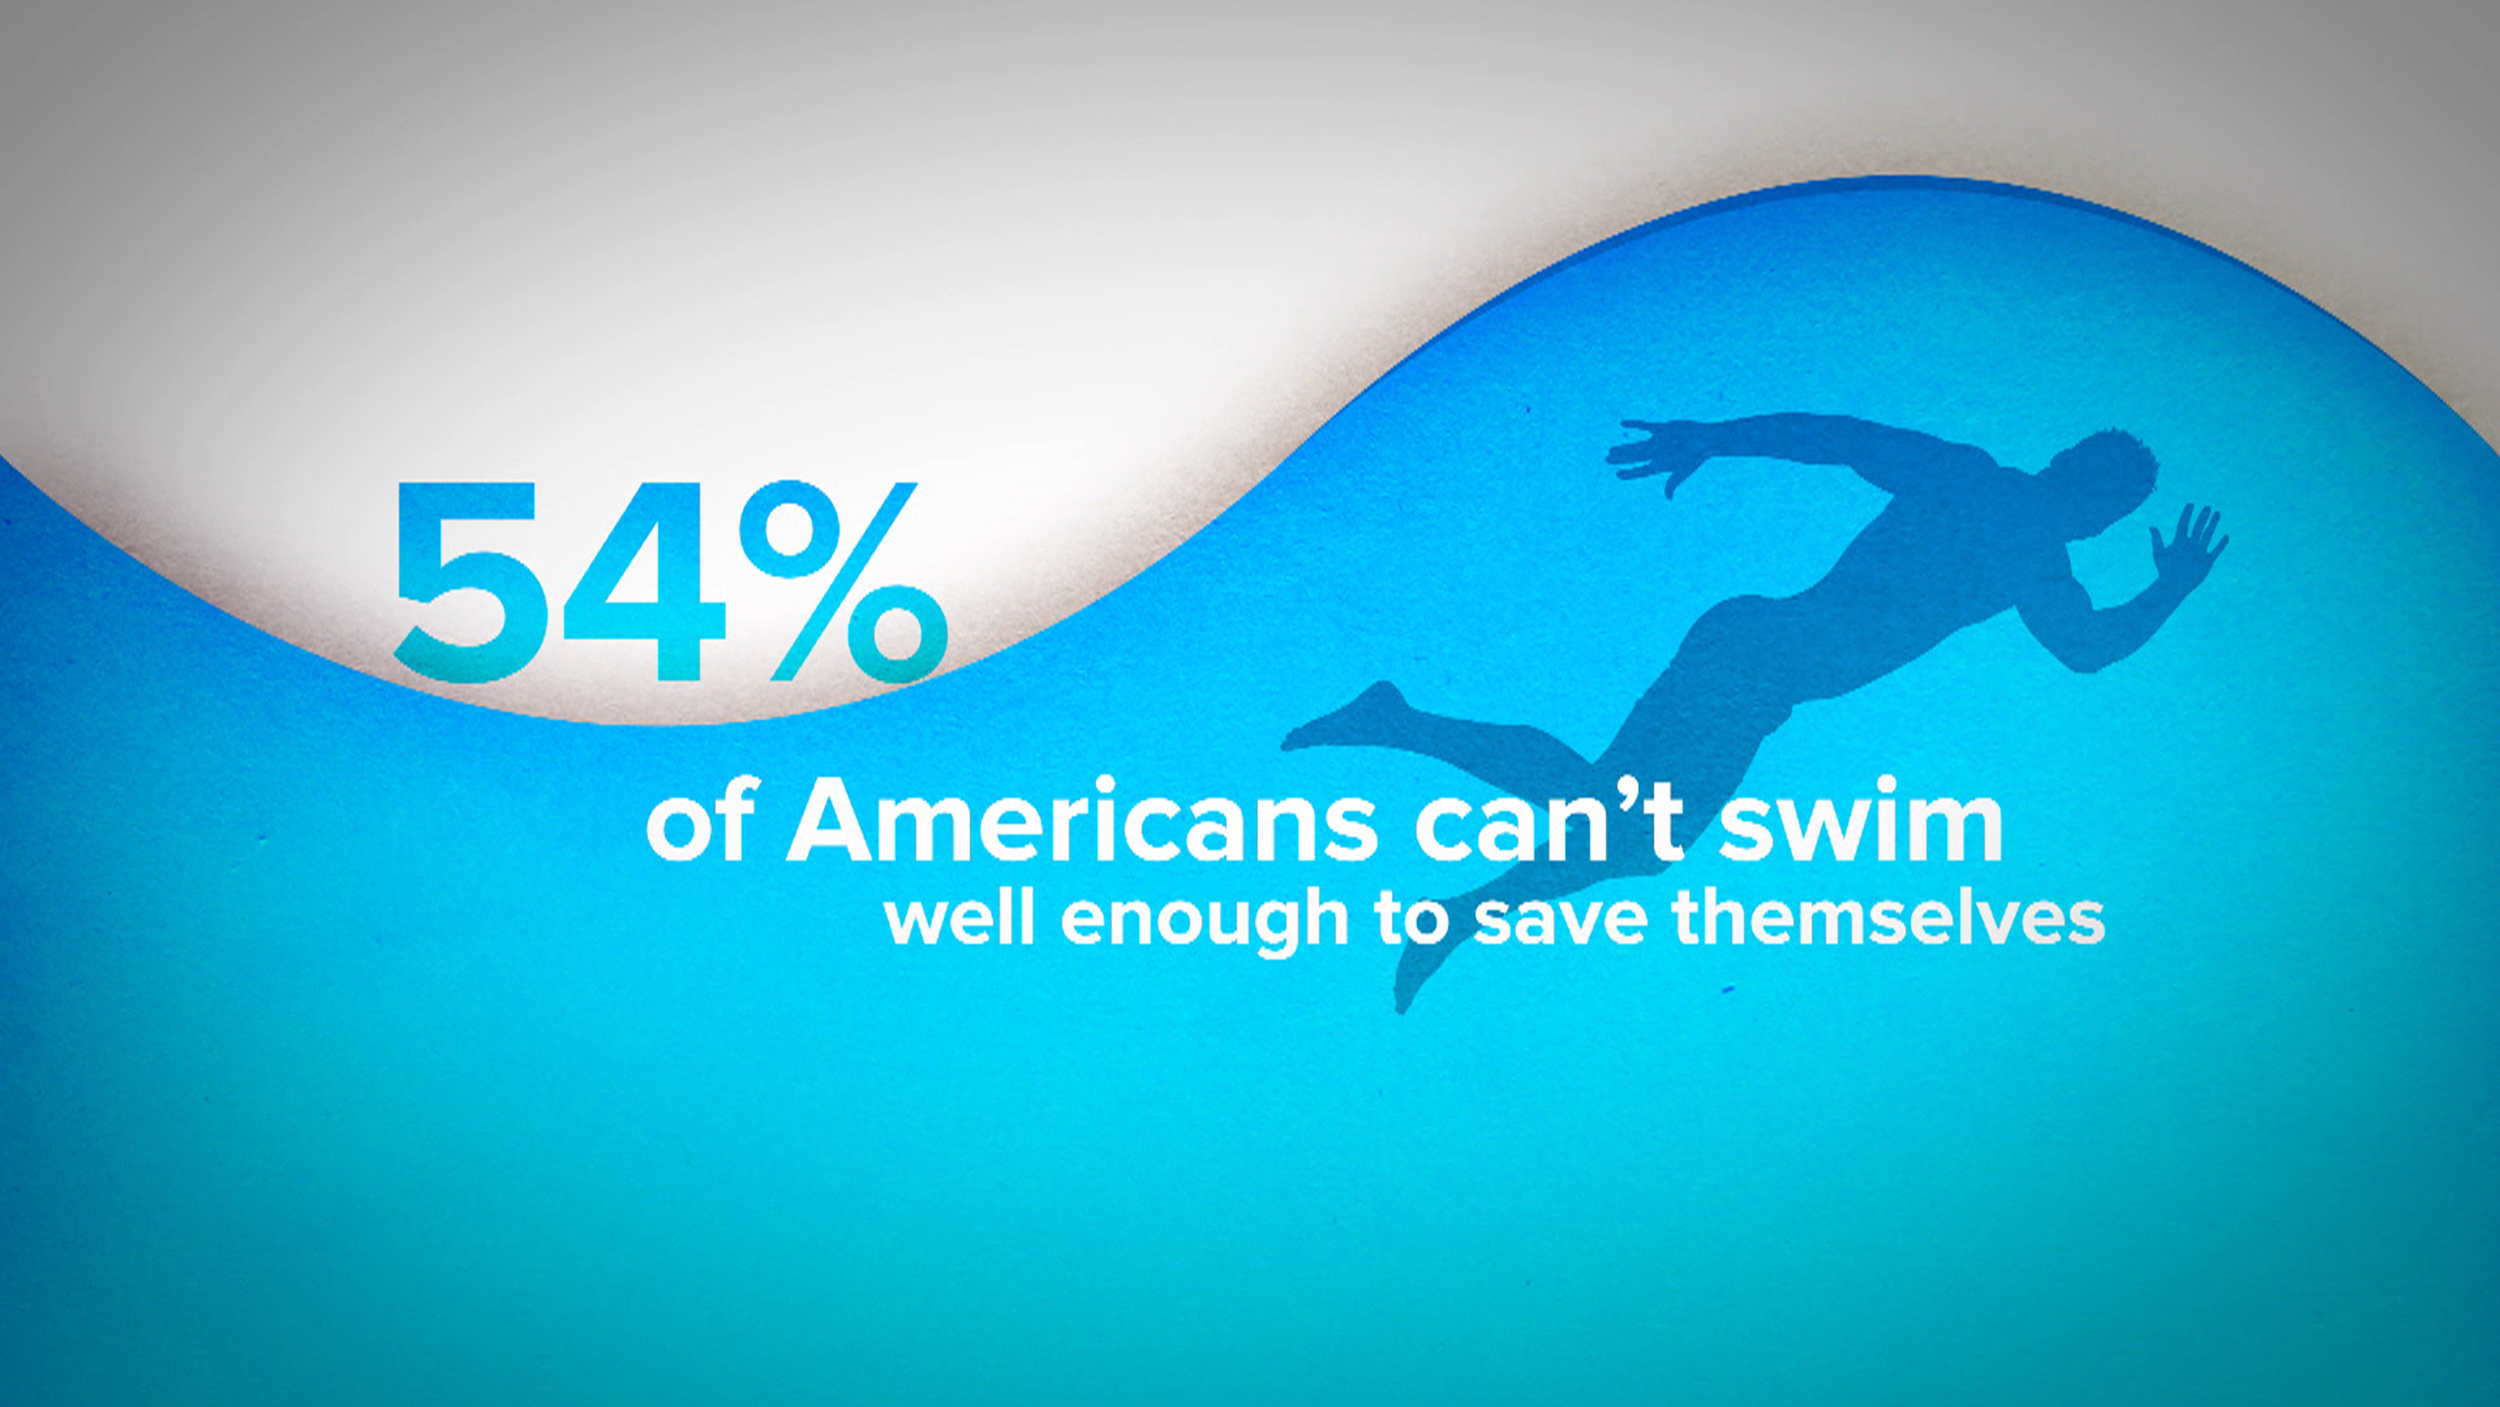 More than half of Americans can't swim well enough to save themselves. Can  you?